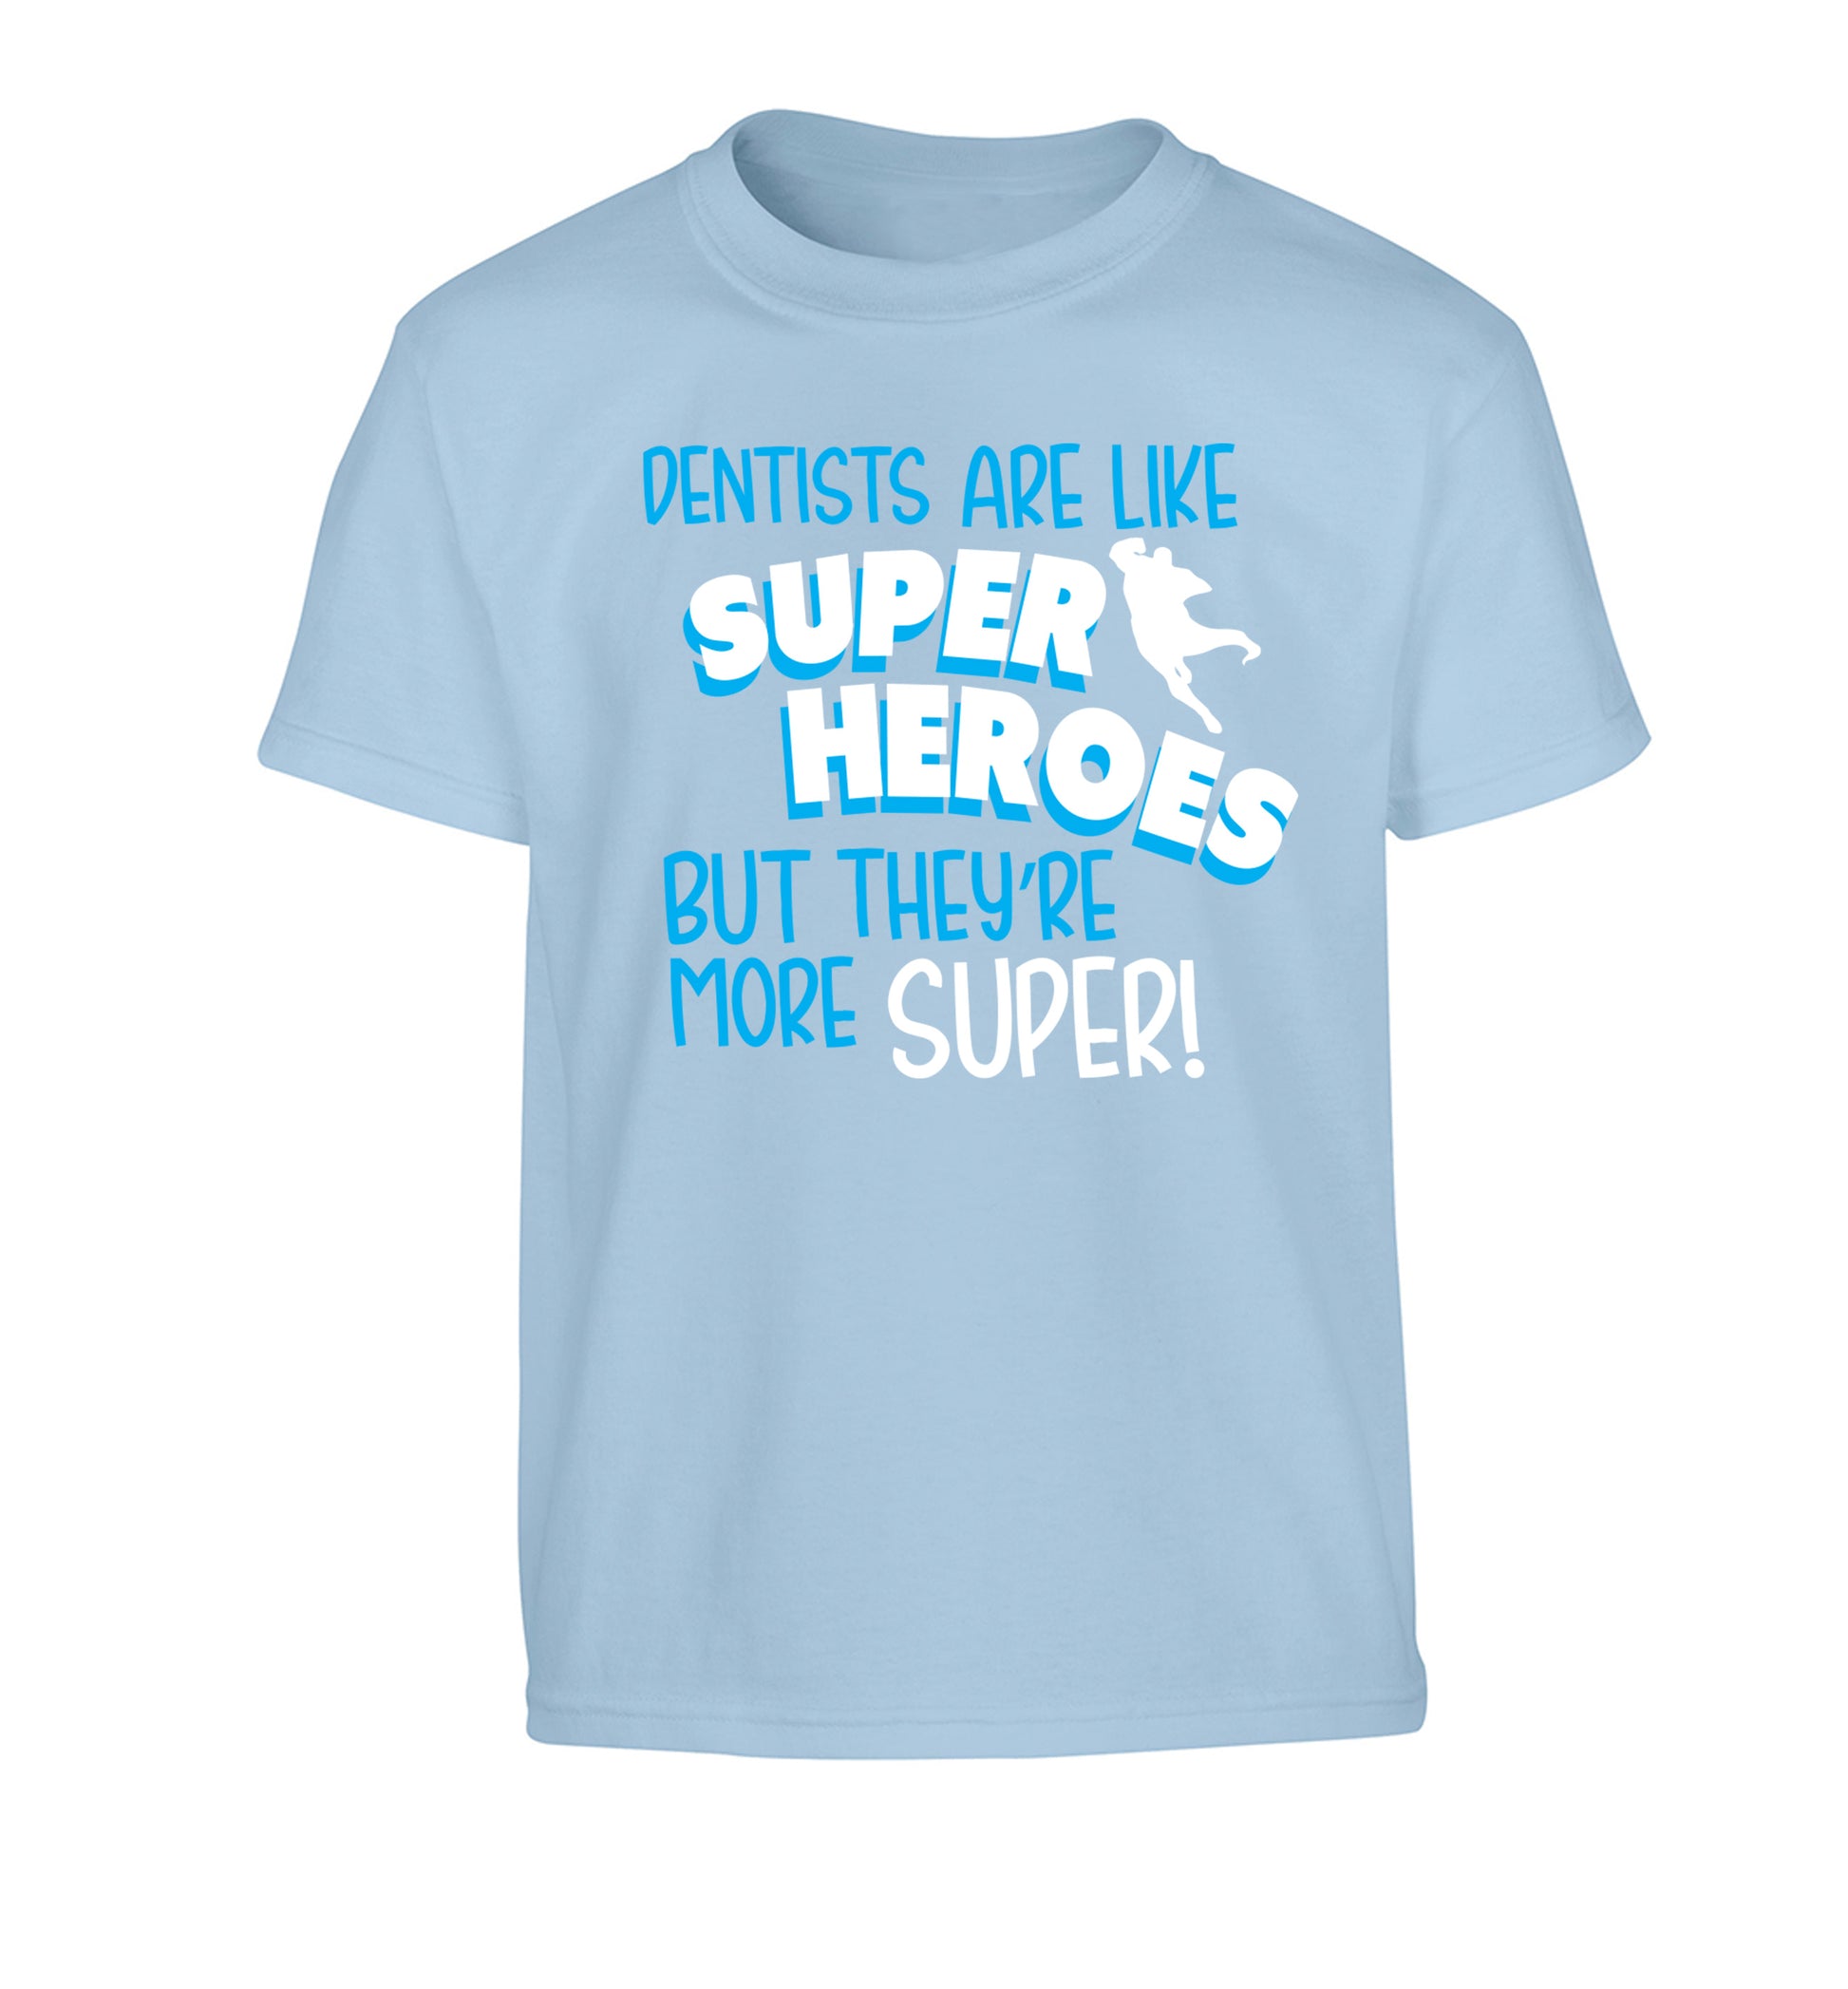 Dentists are like superheros but they're more super Children's light blue Tshirt 12-13 Years